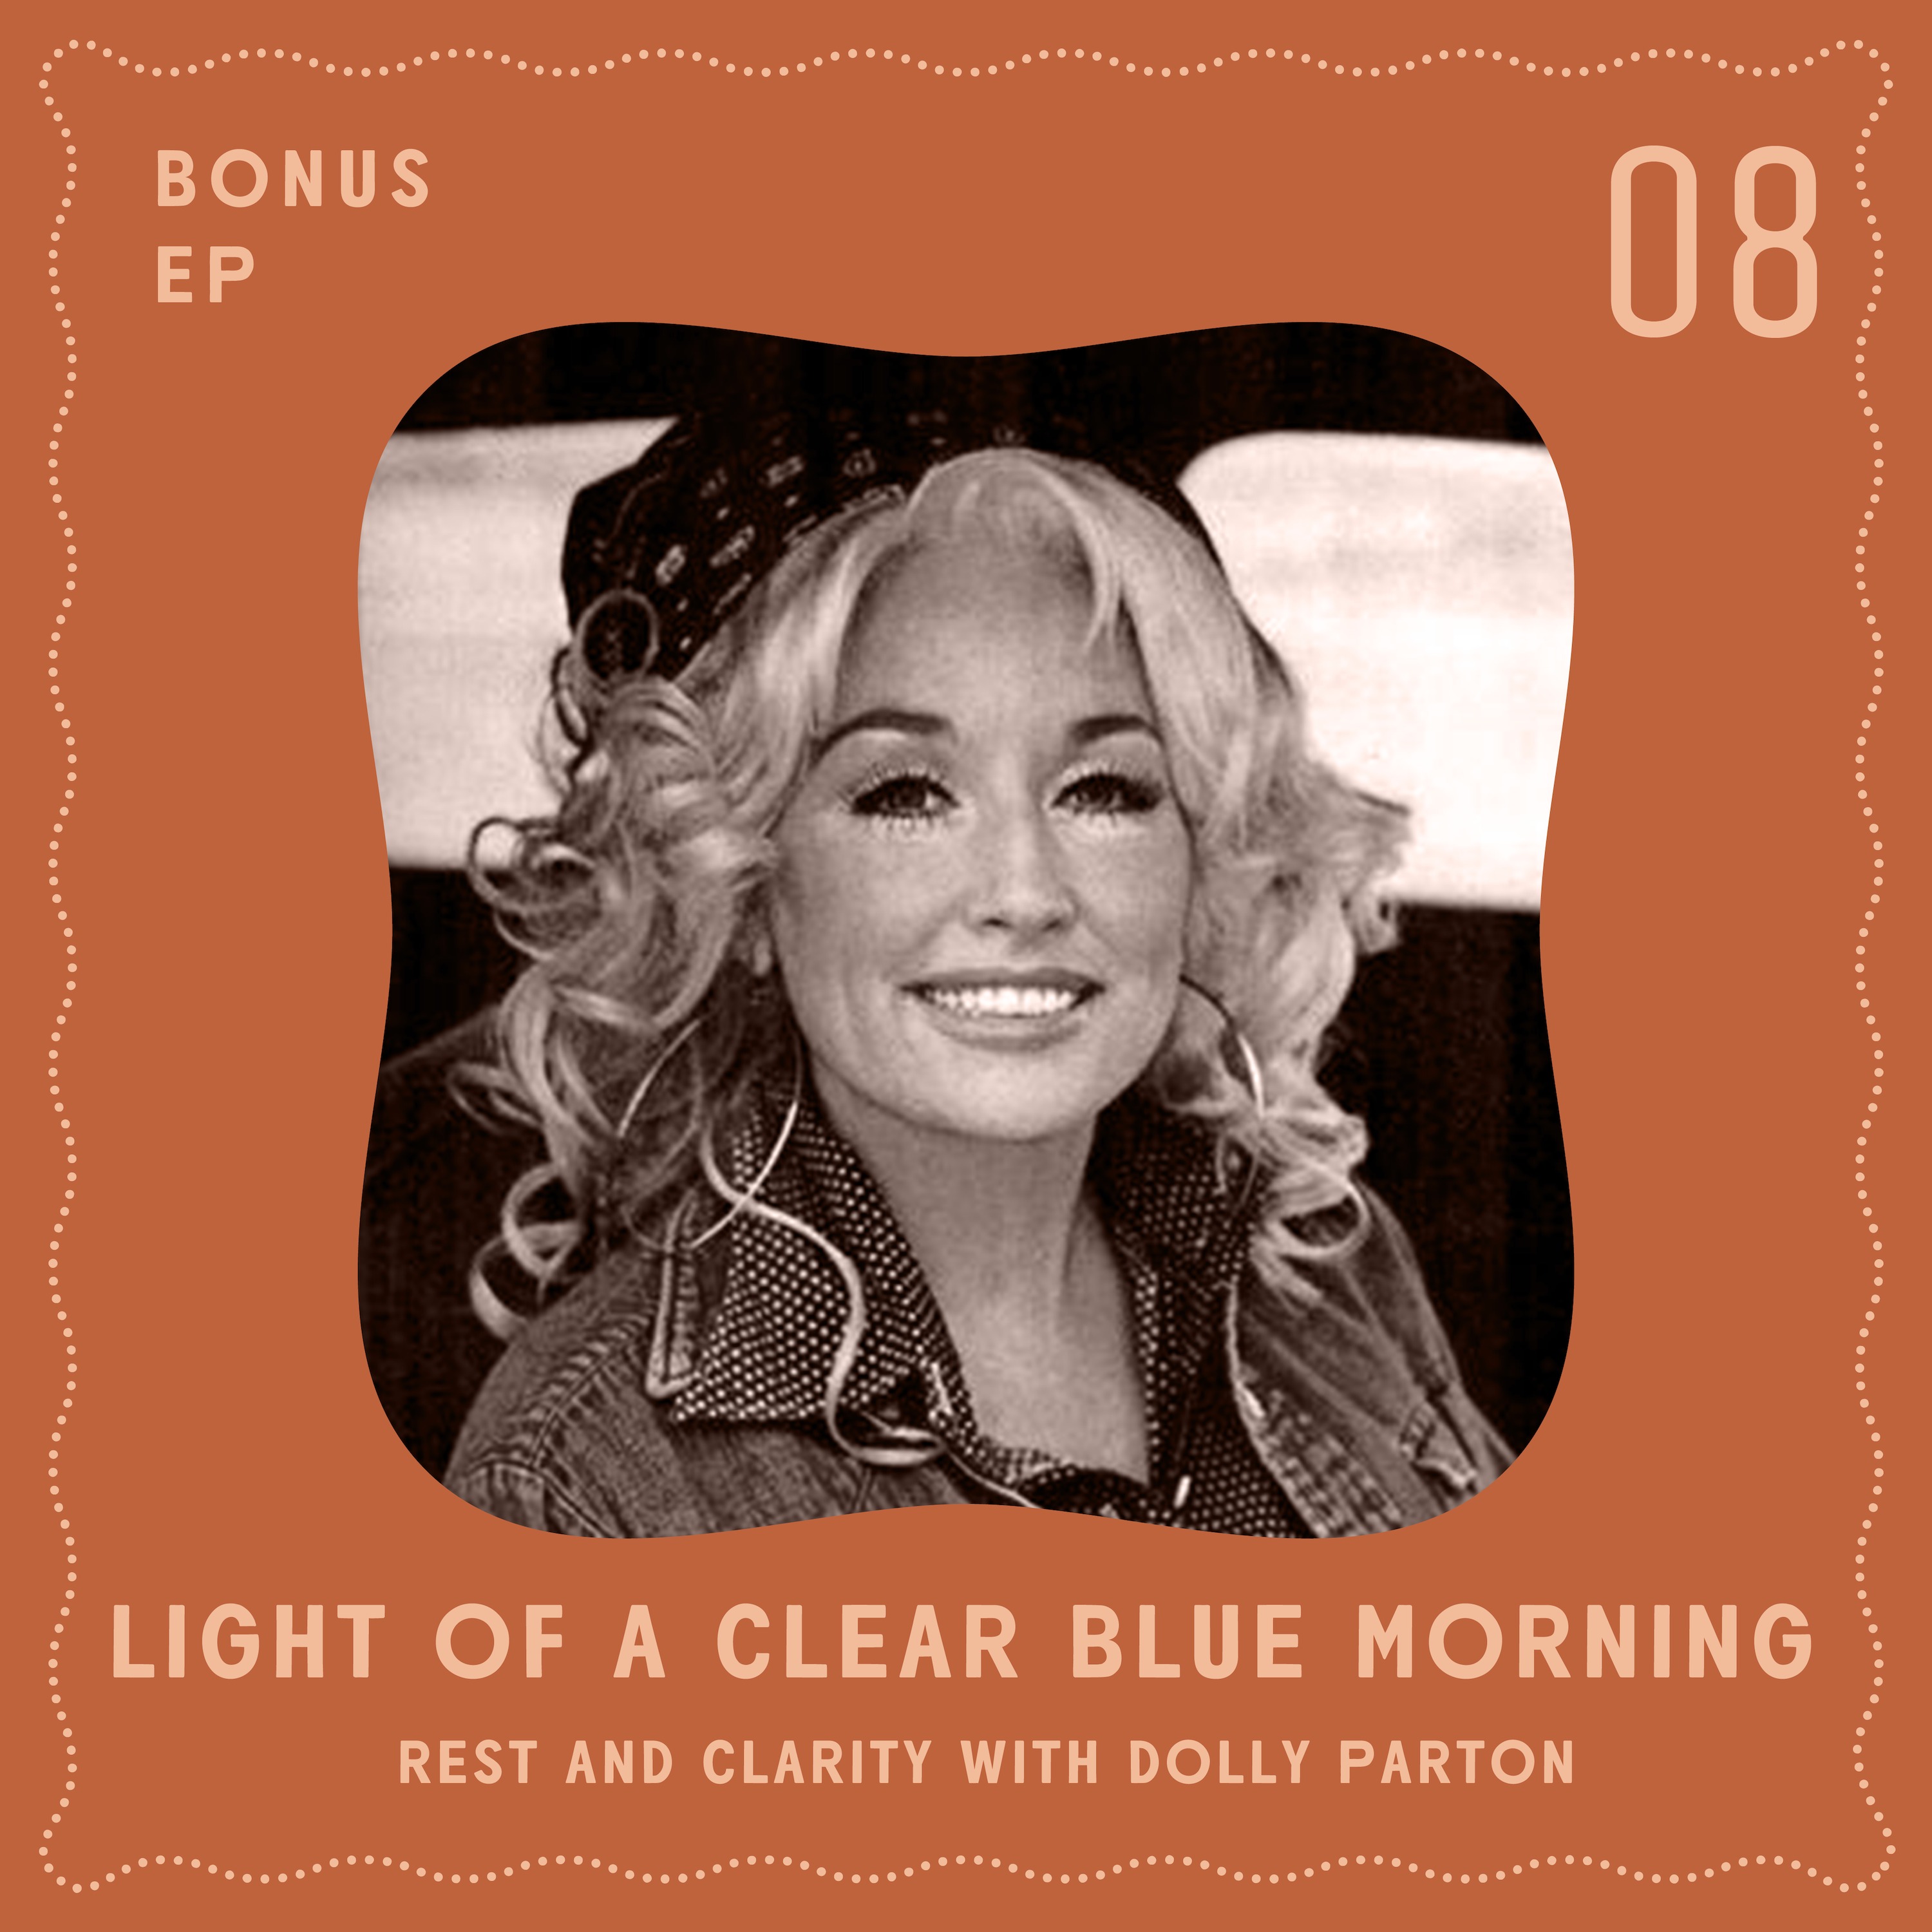 Light of a Clear Blue Morning - Rest and Clarity with Dolly Parton